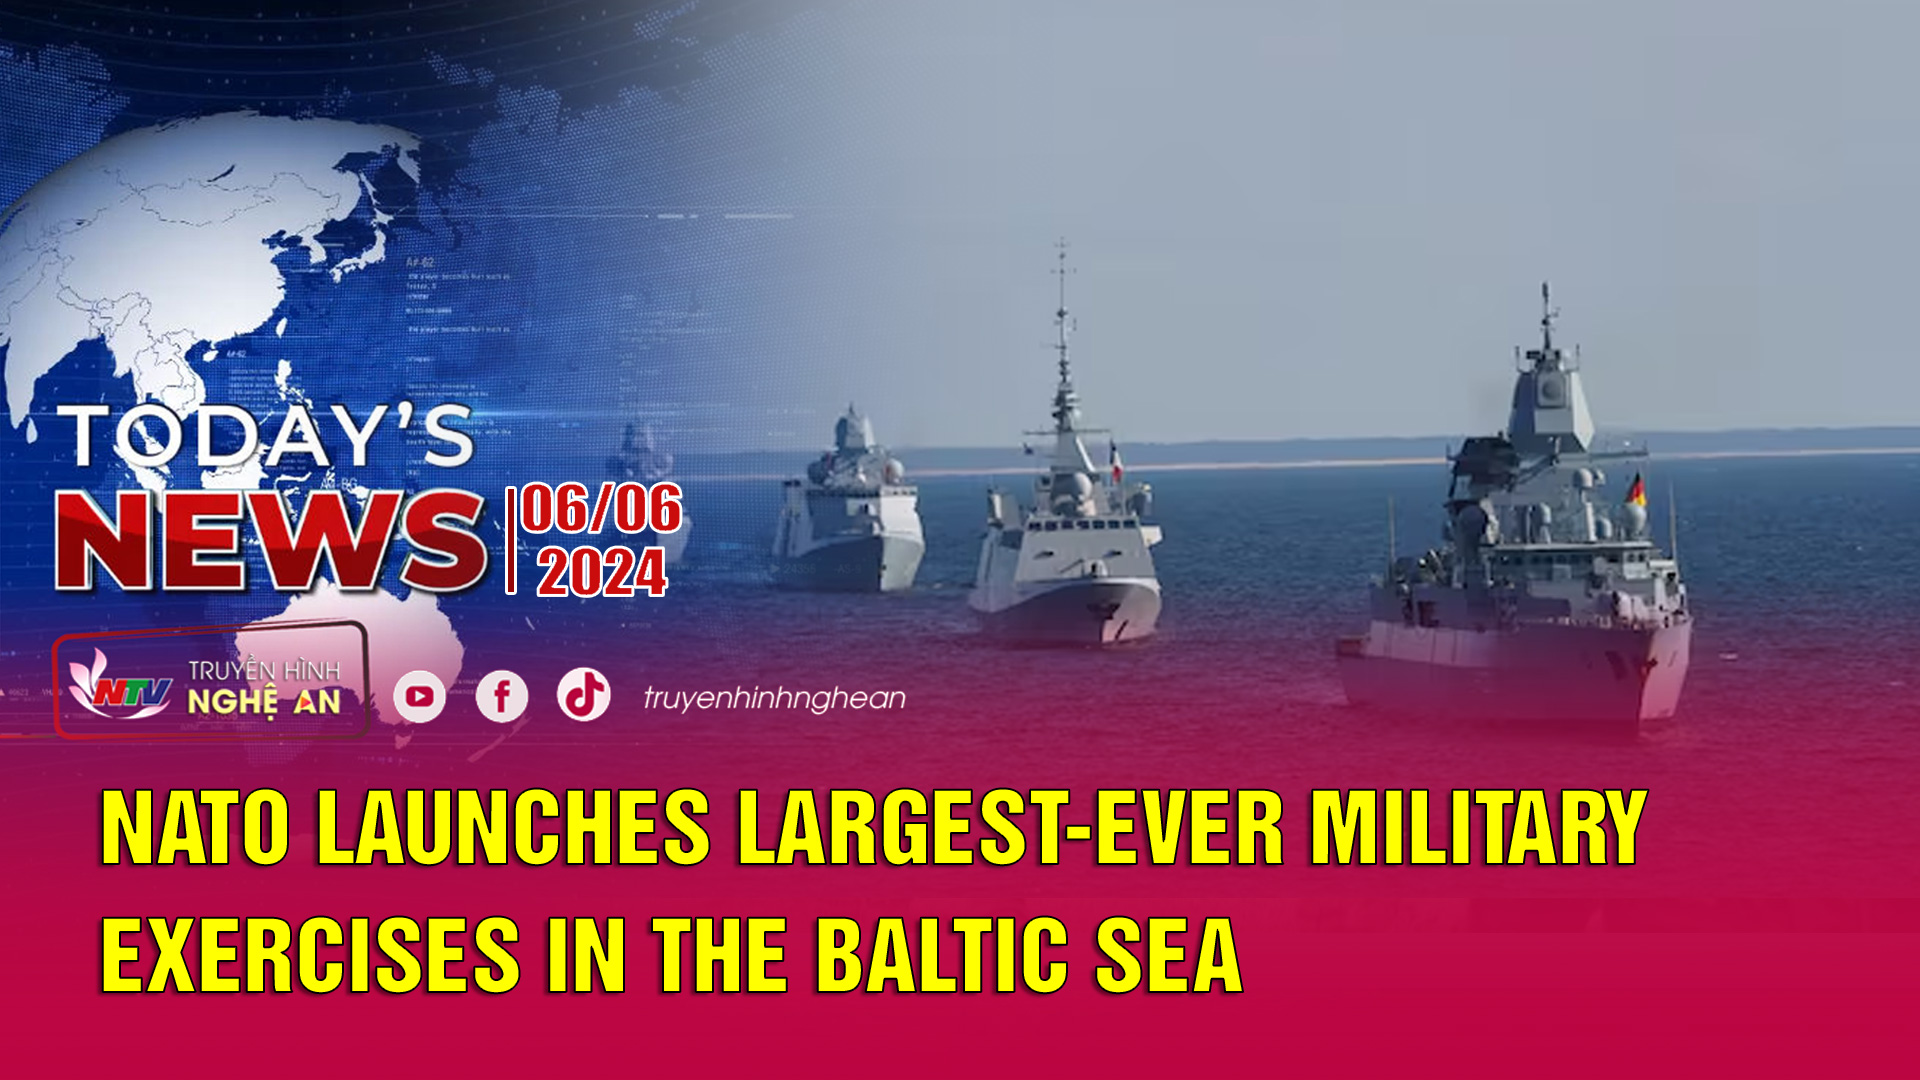 Today's News 06/6/2024: NATO launches largest-ever military exercises in the Baltic Sea